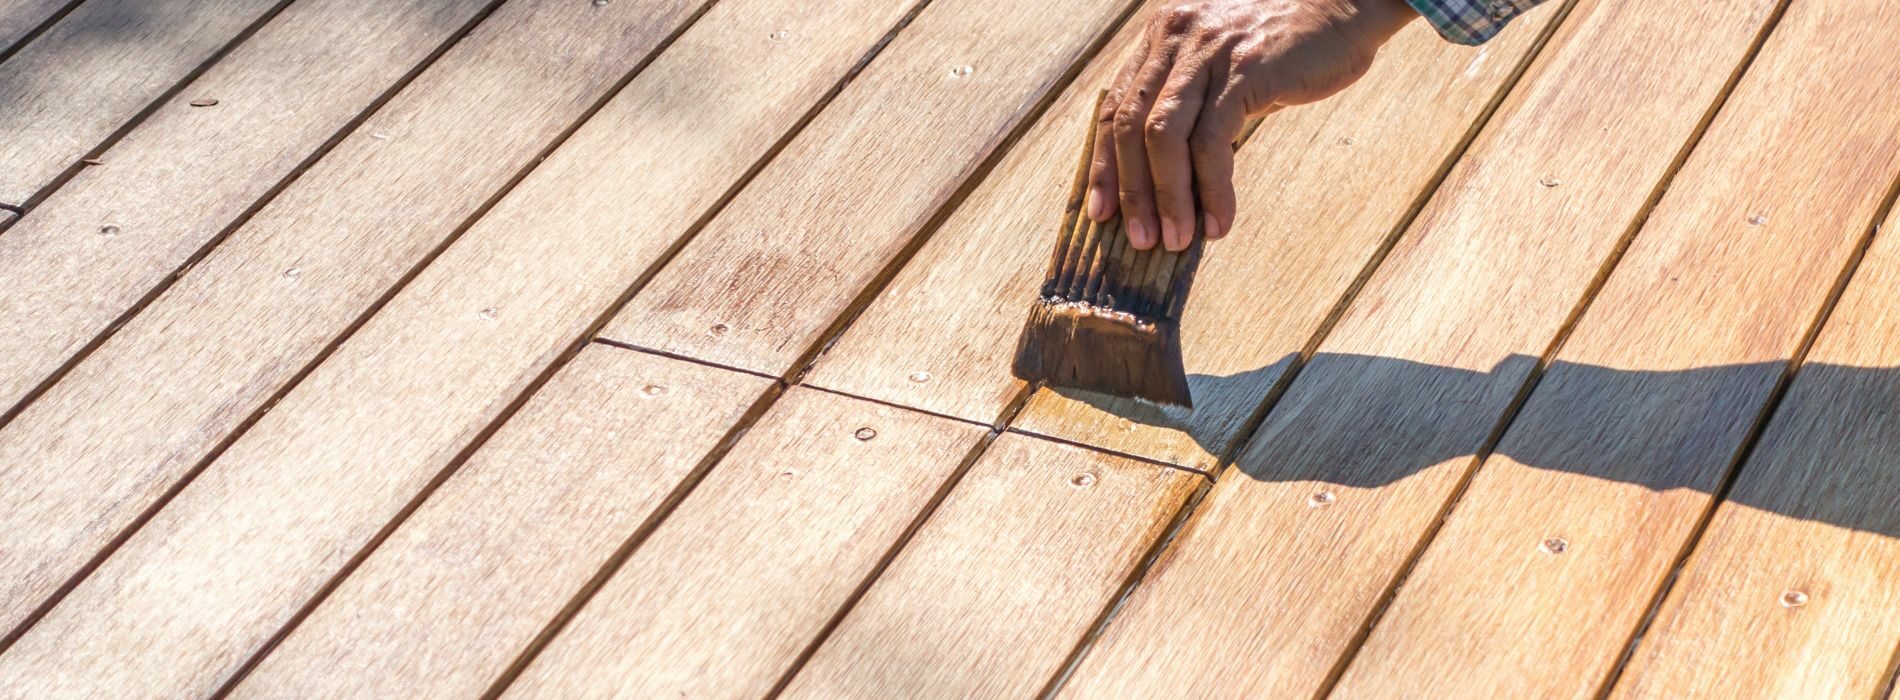 A person with a brush on a wooden deck. 